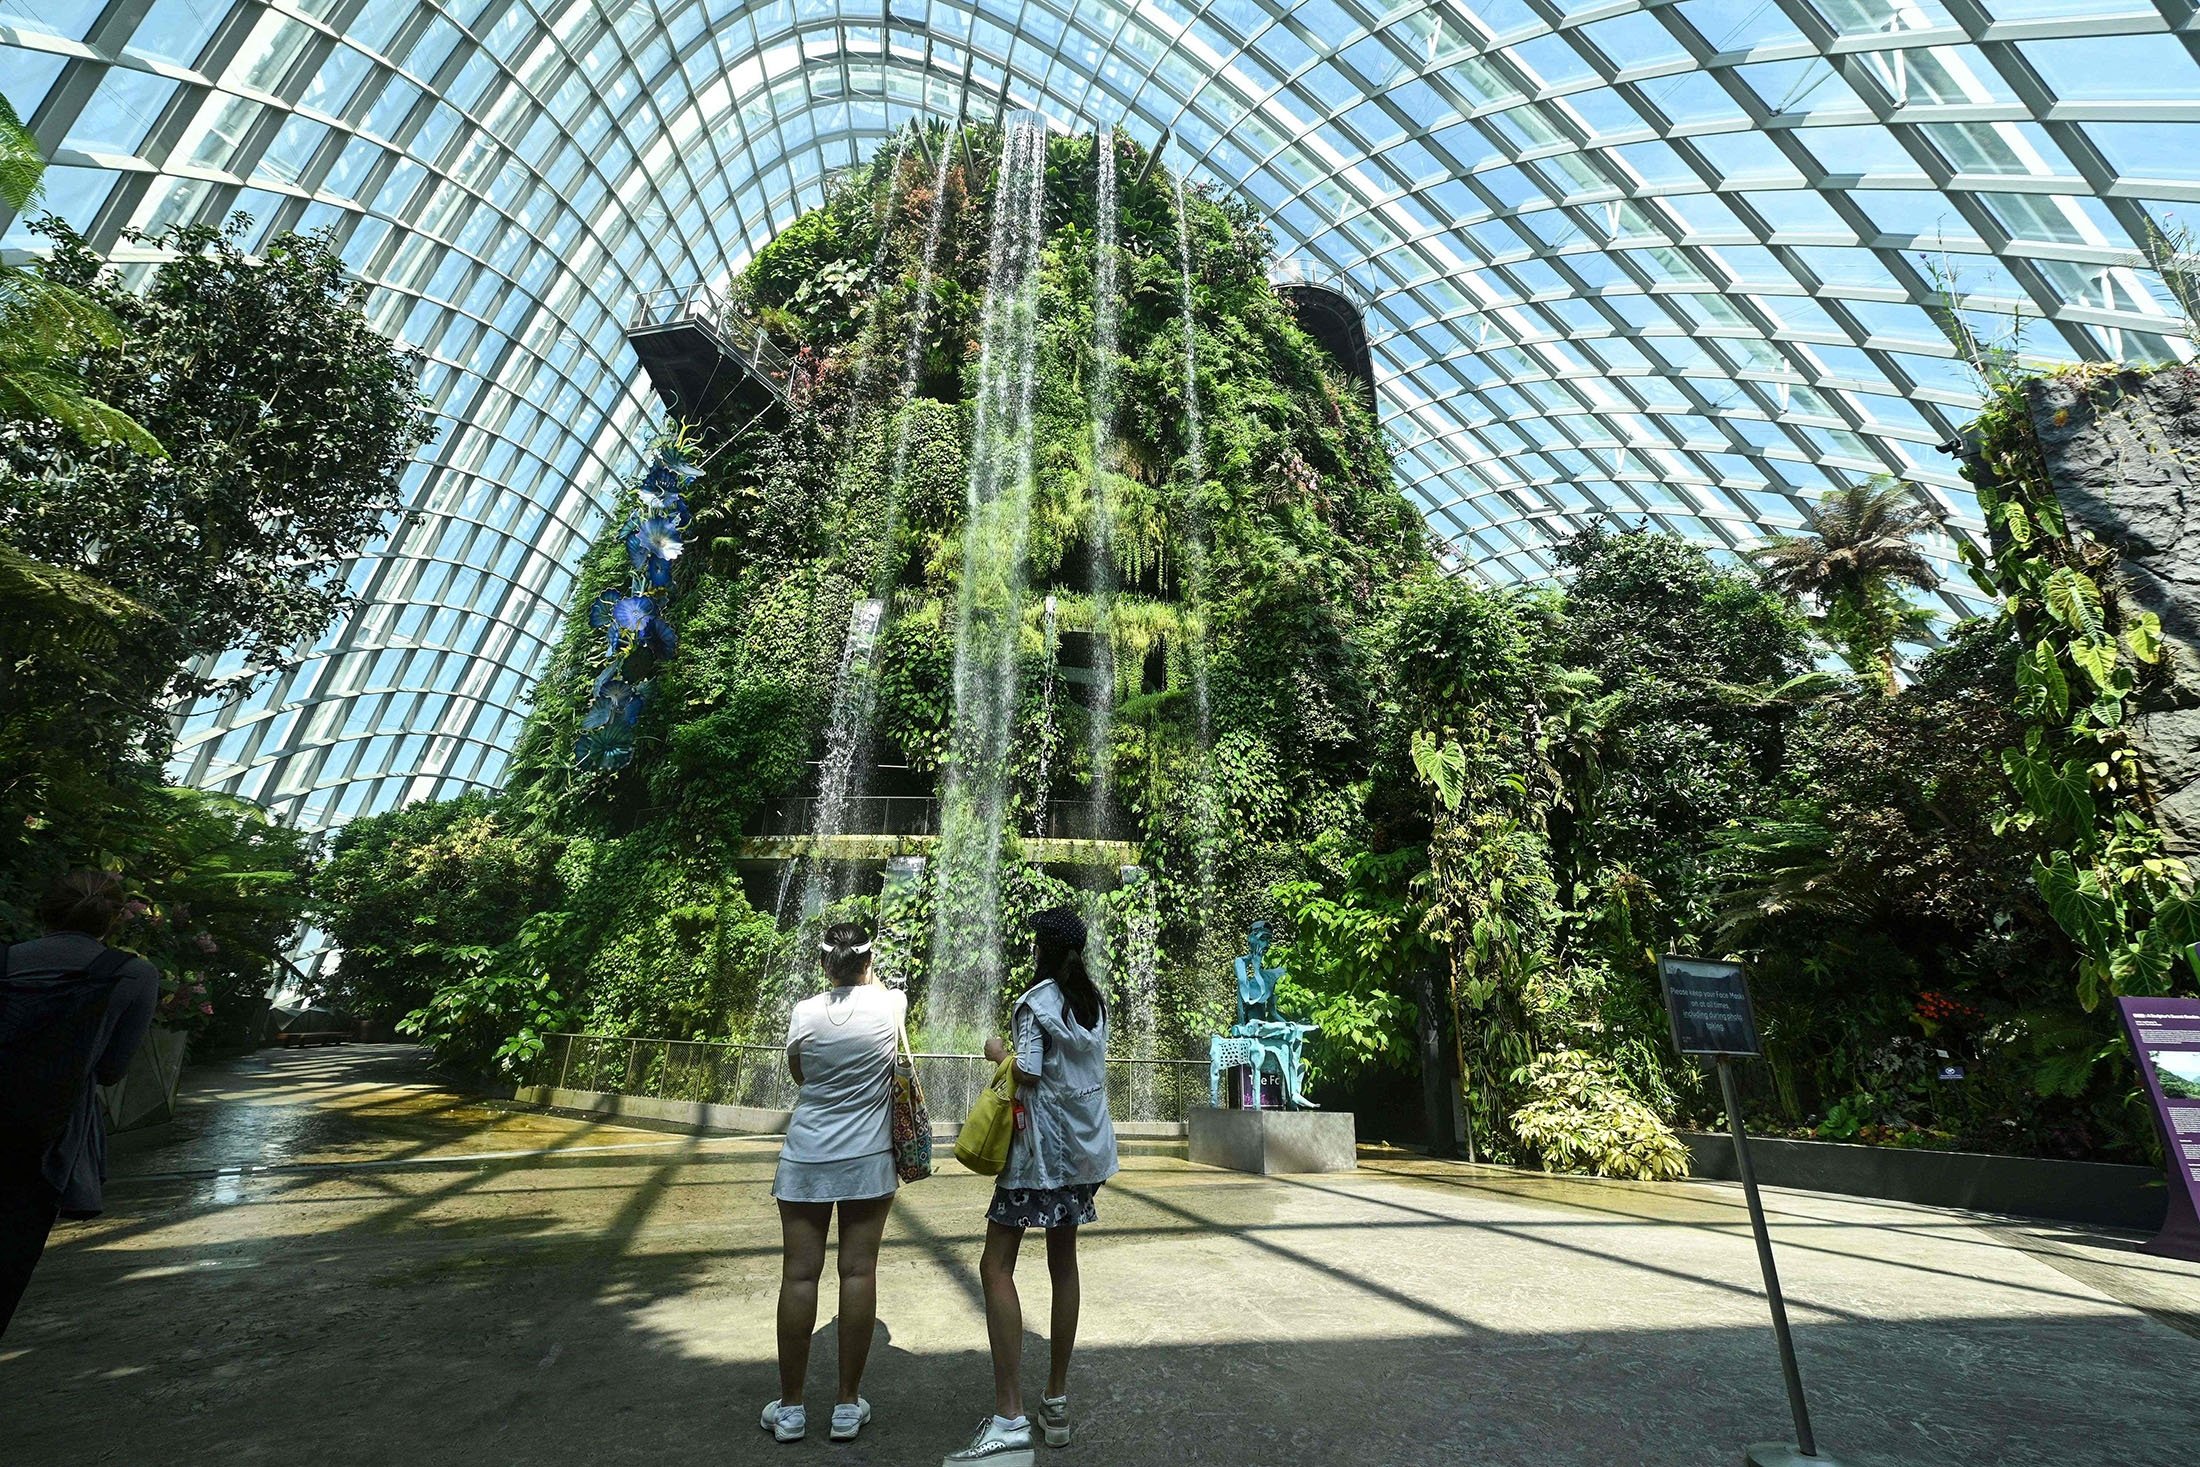 A view inside the Cloud Forest at Gardens by the Bay in Singapore, July 26, 2021. (AFP Photo)